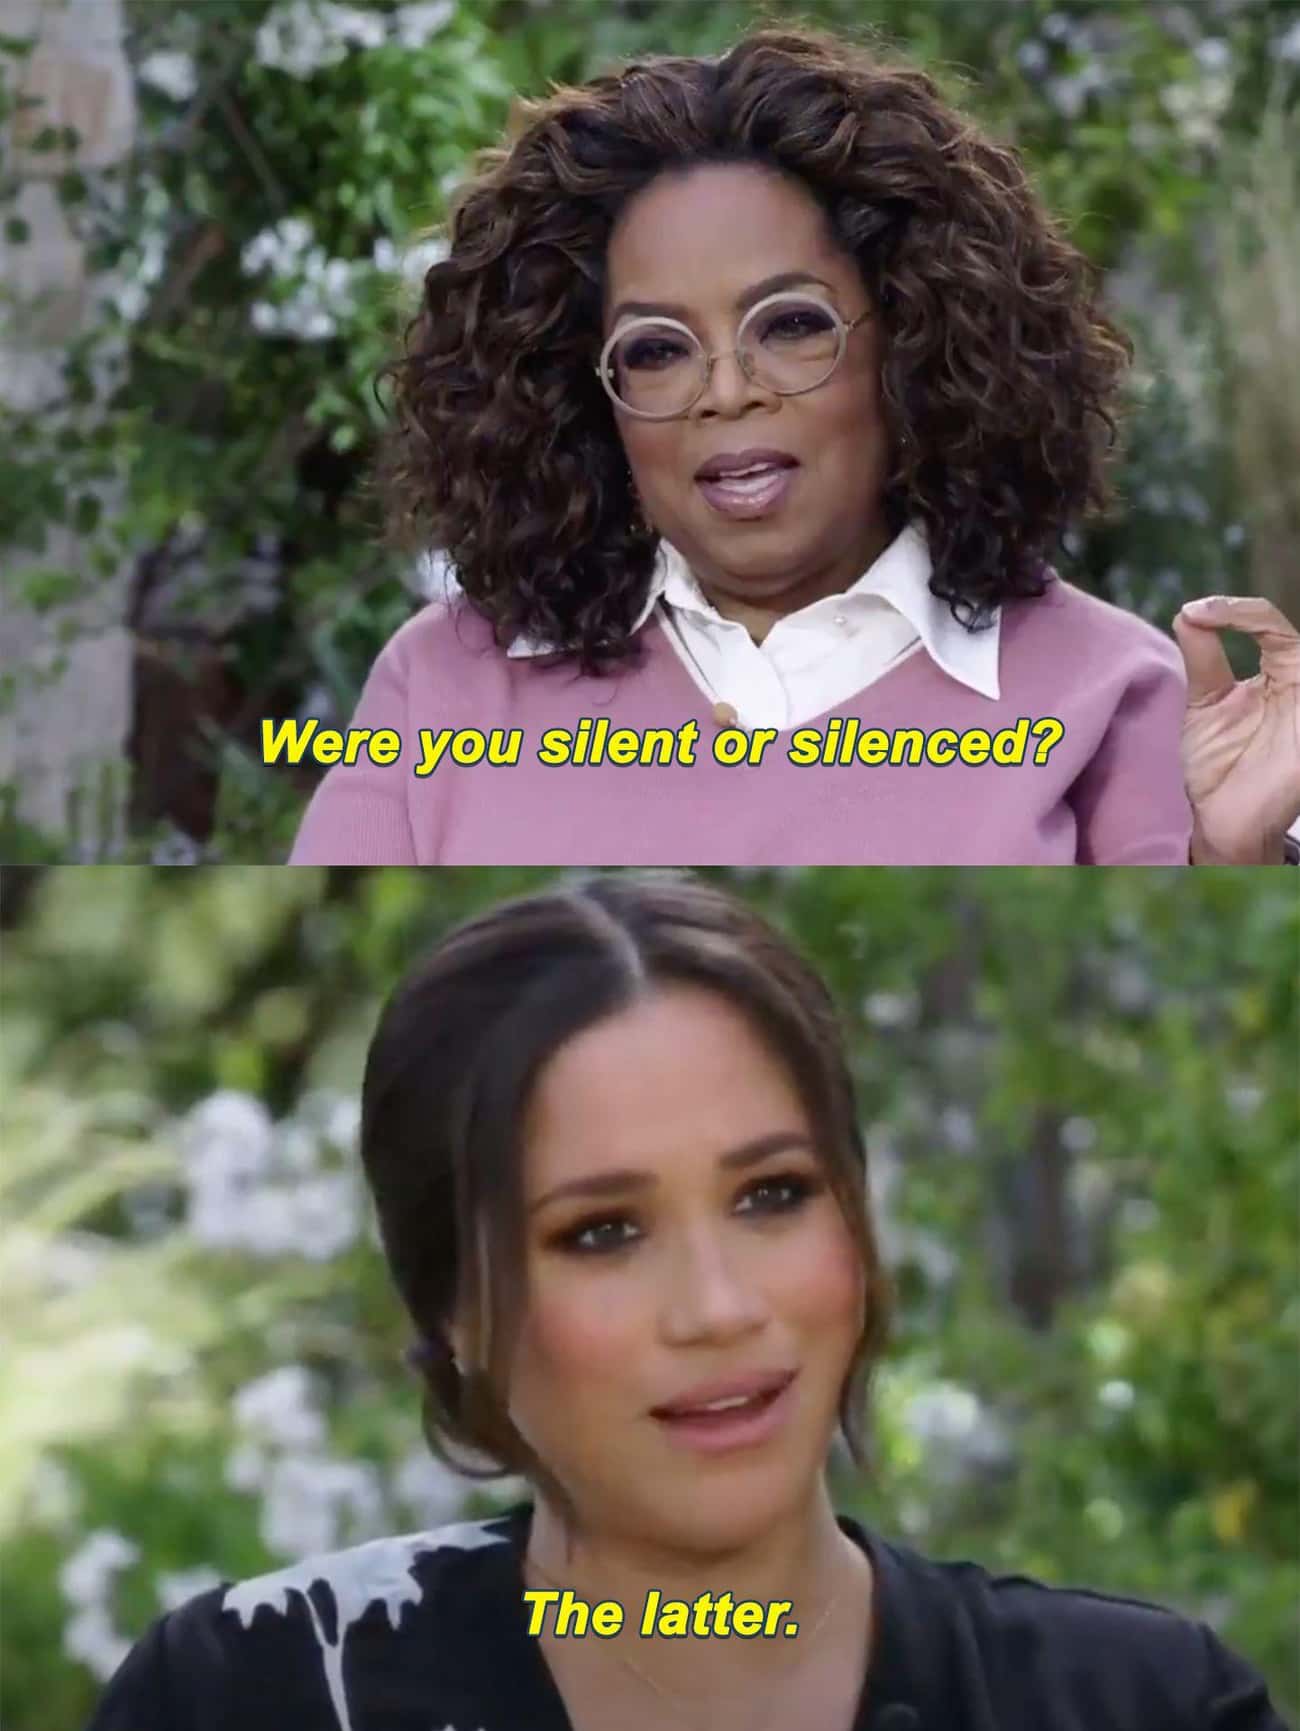 Meghan Markle's Recent Interview With Oprah Came After Her Controversial Exit From The Royal Family